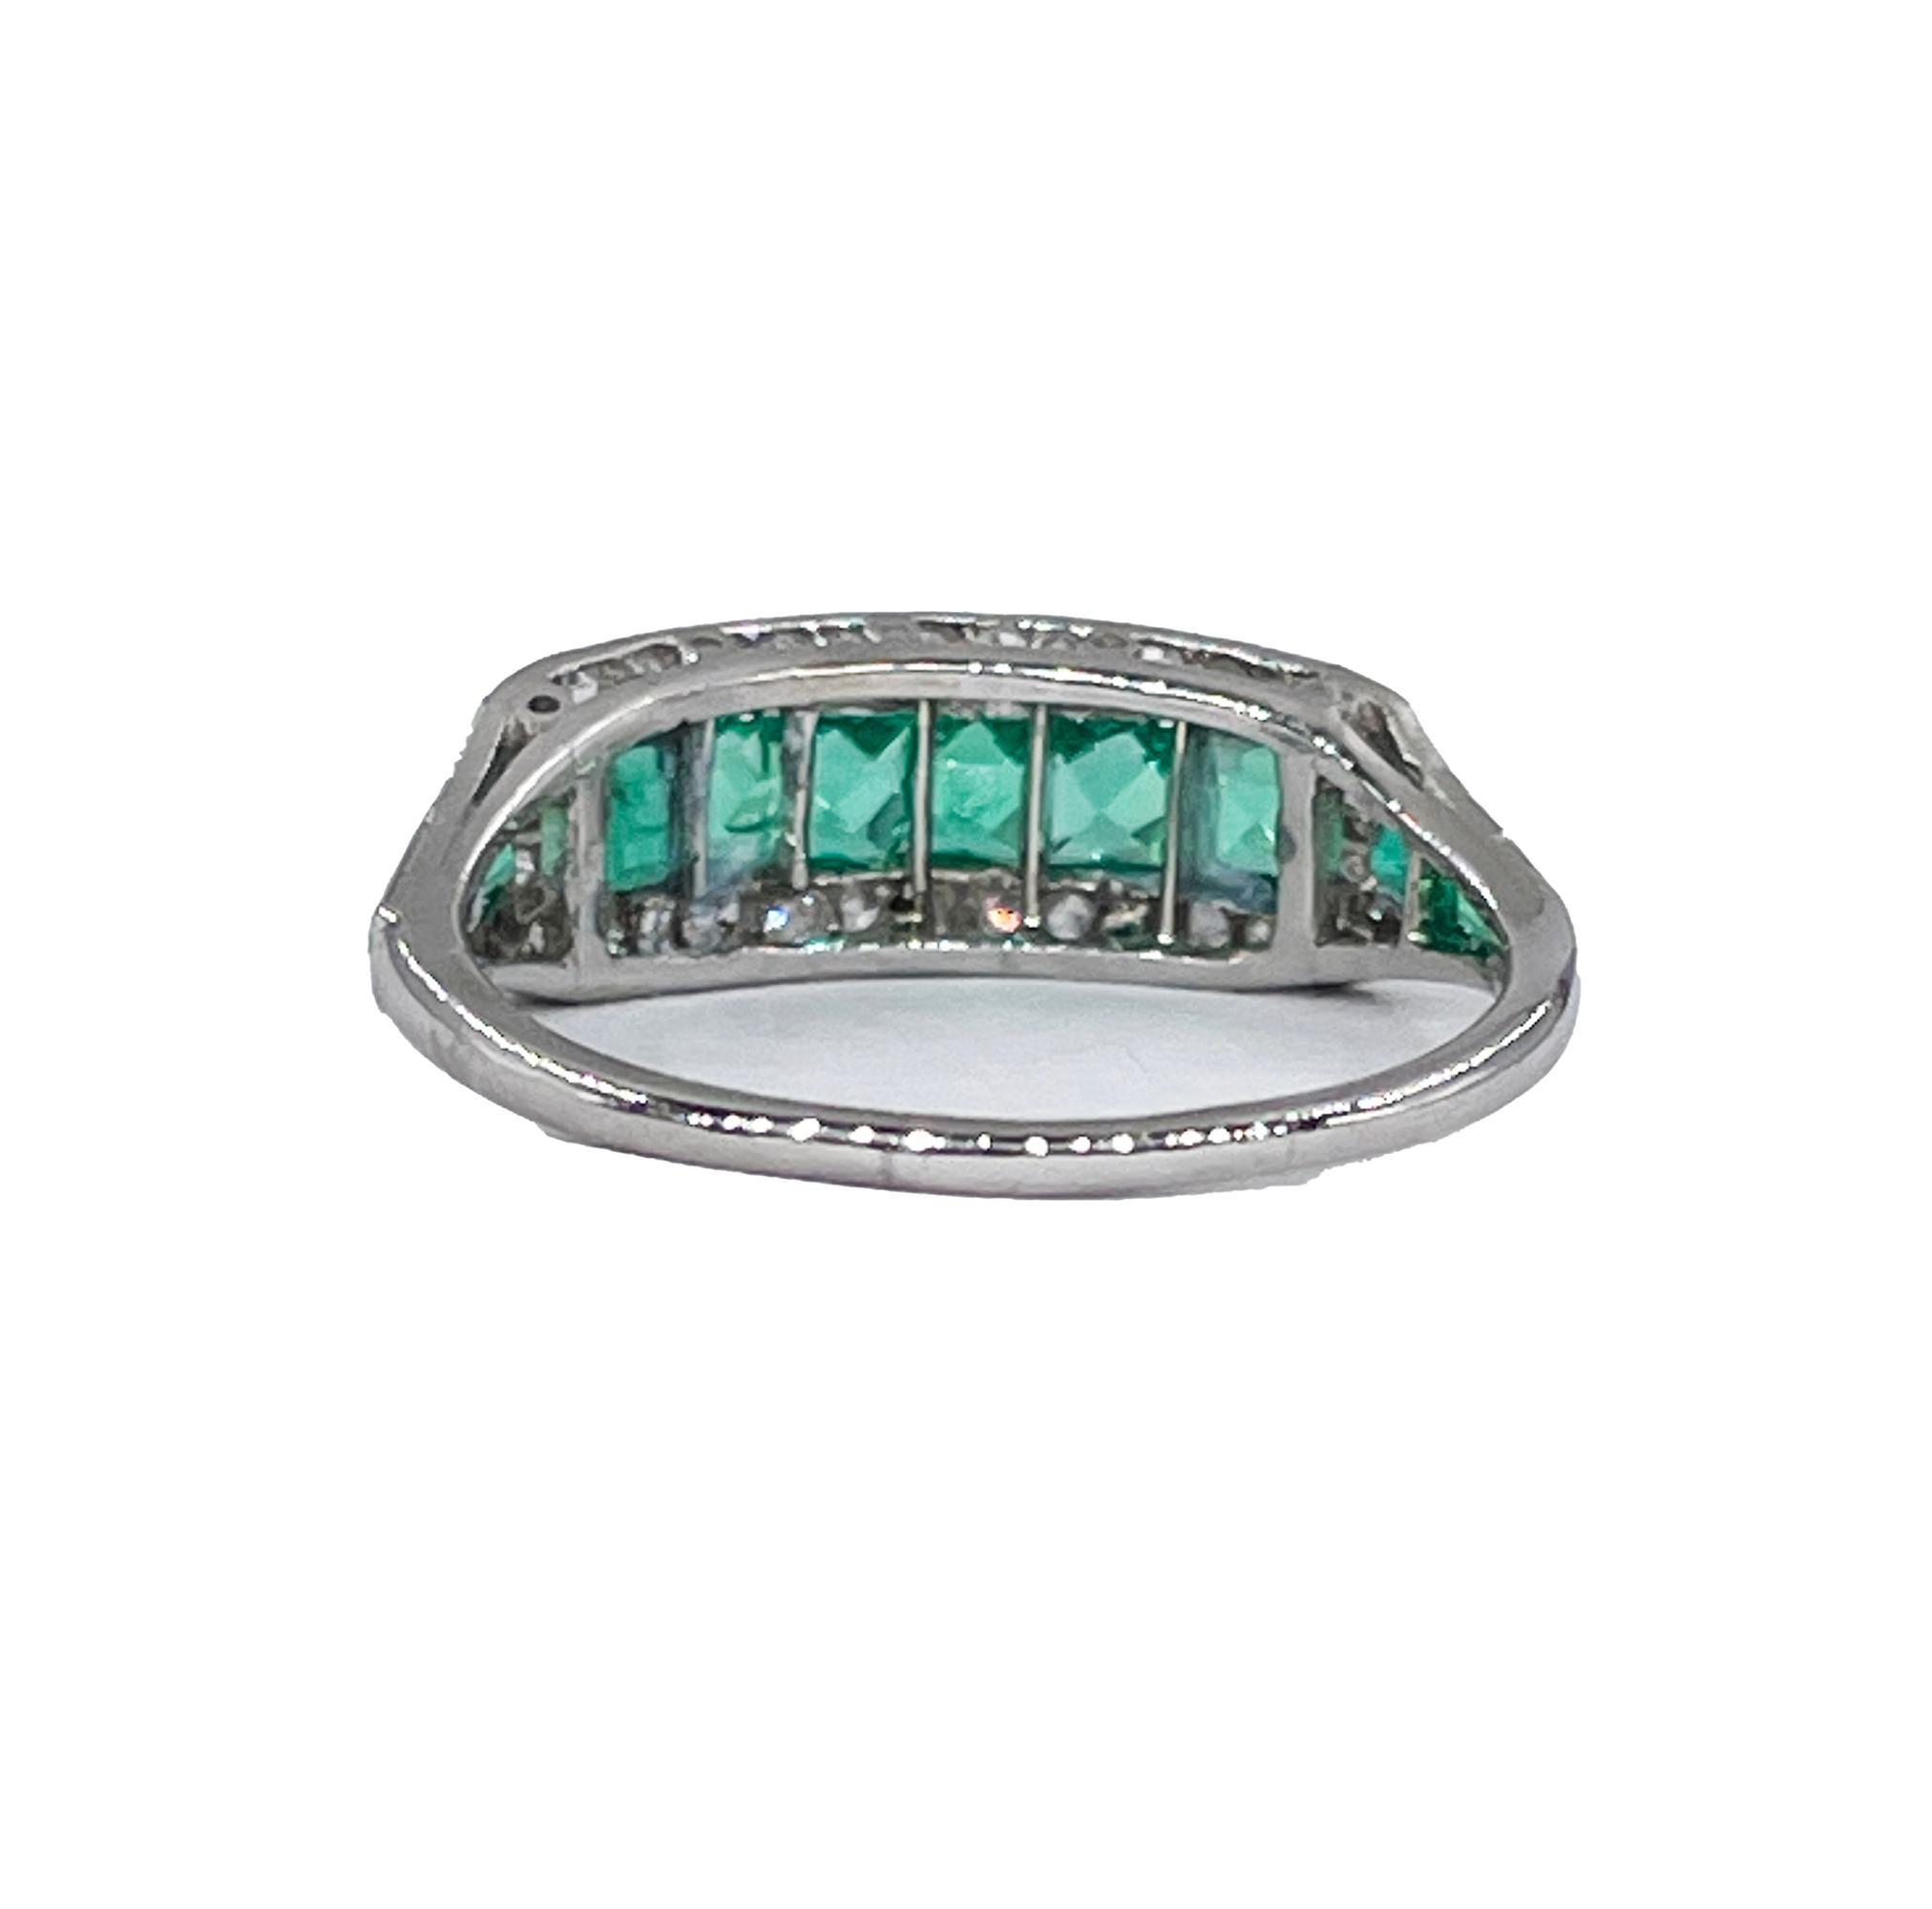 Antique Art Deco 1.30ct Emerald & Diamond Wedding Engagement Anniversary Platinum Ring Band.

Gift-wrap your finger in chic and truly splendid, far-from-ordinary, original late Art Deco jewel. 
This precious Ring, in glorious green and white,